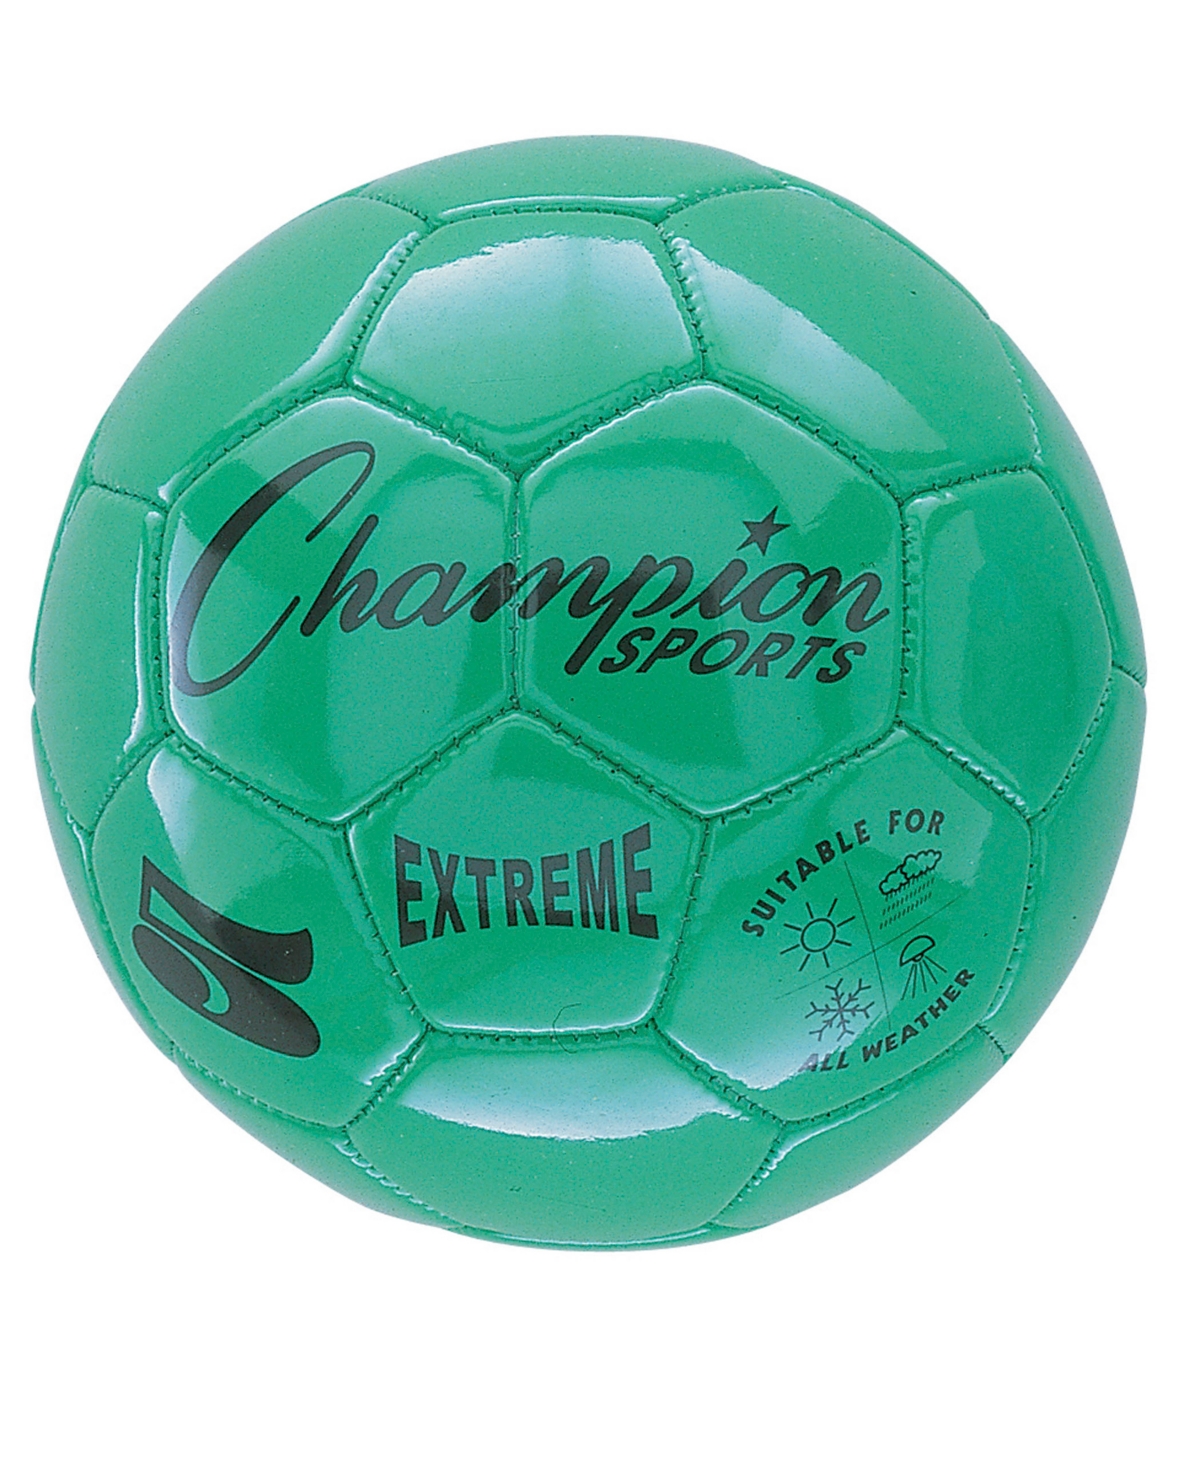 Champion Sports Extreme Soccer Ball In Green